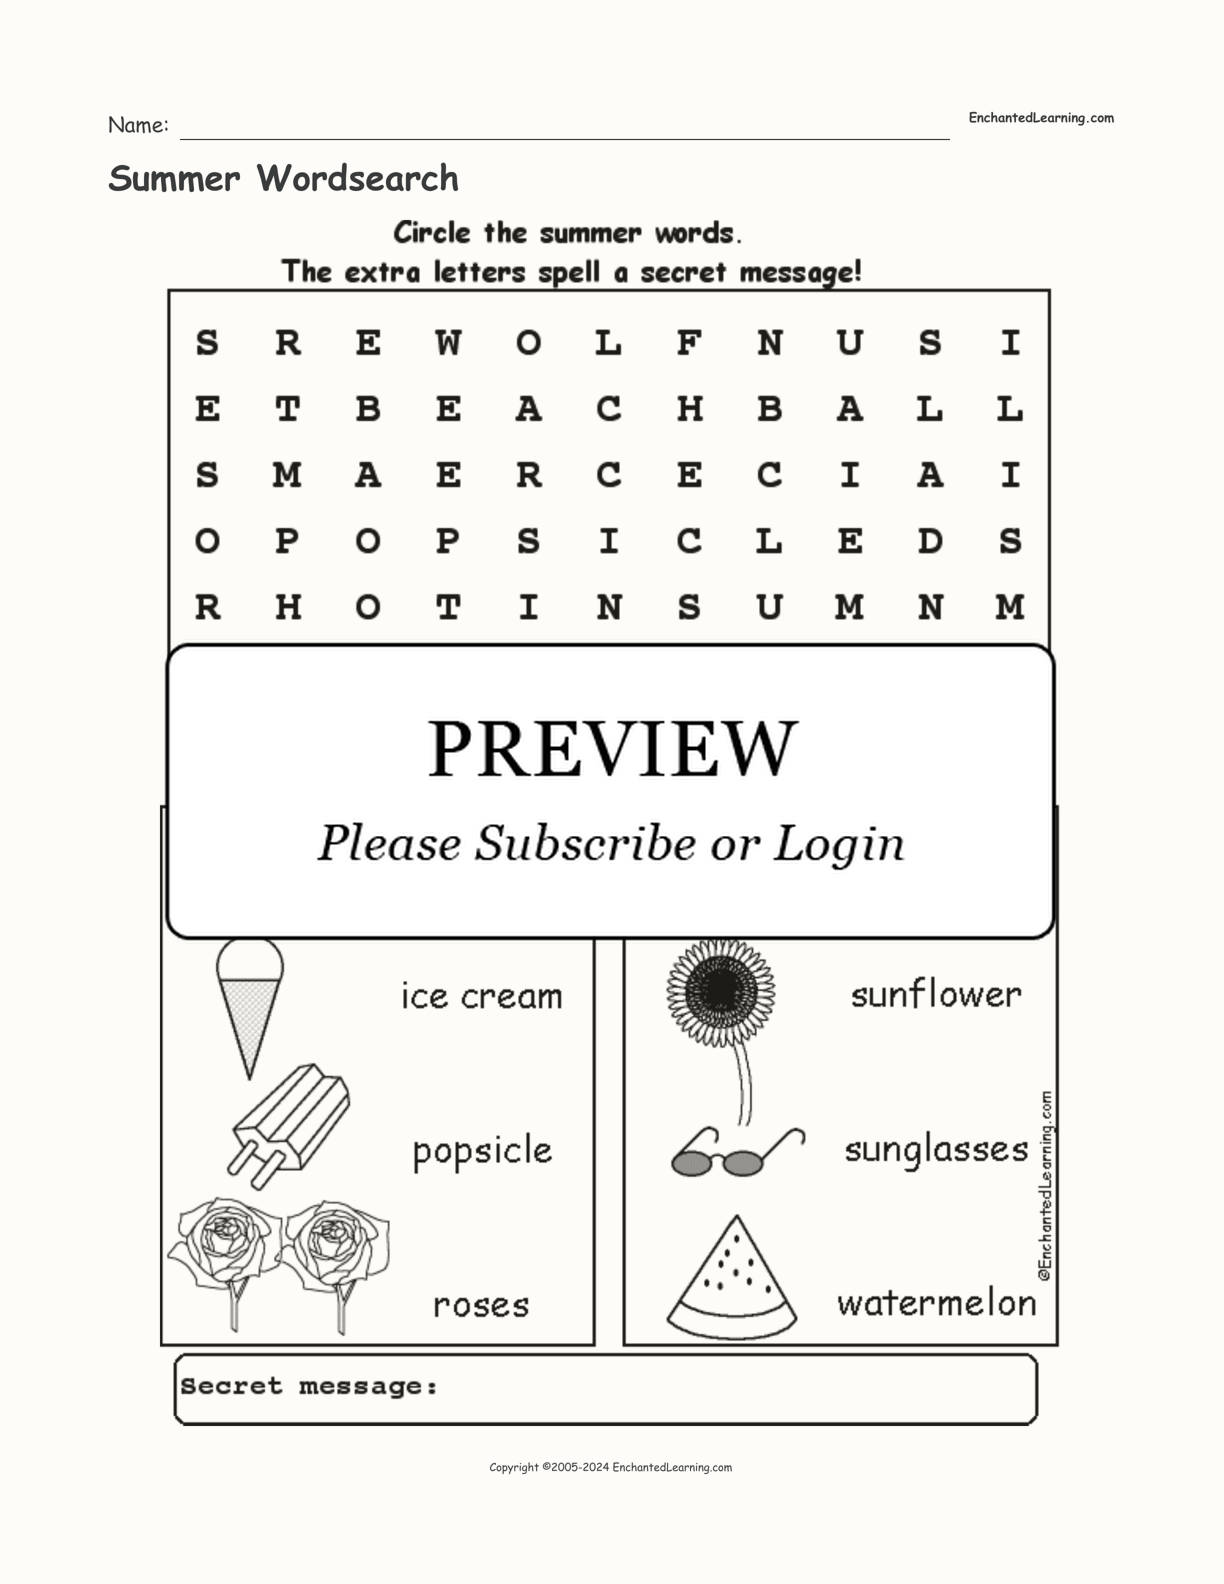 Summer Wordsearch interactive worksheet page 1